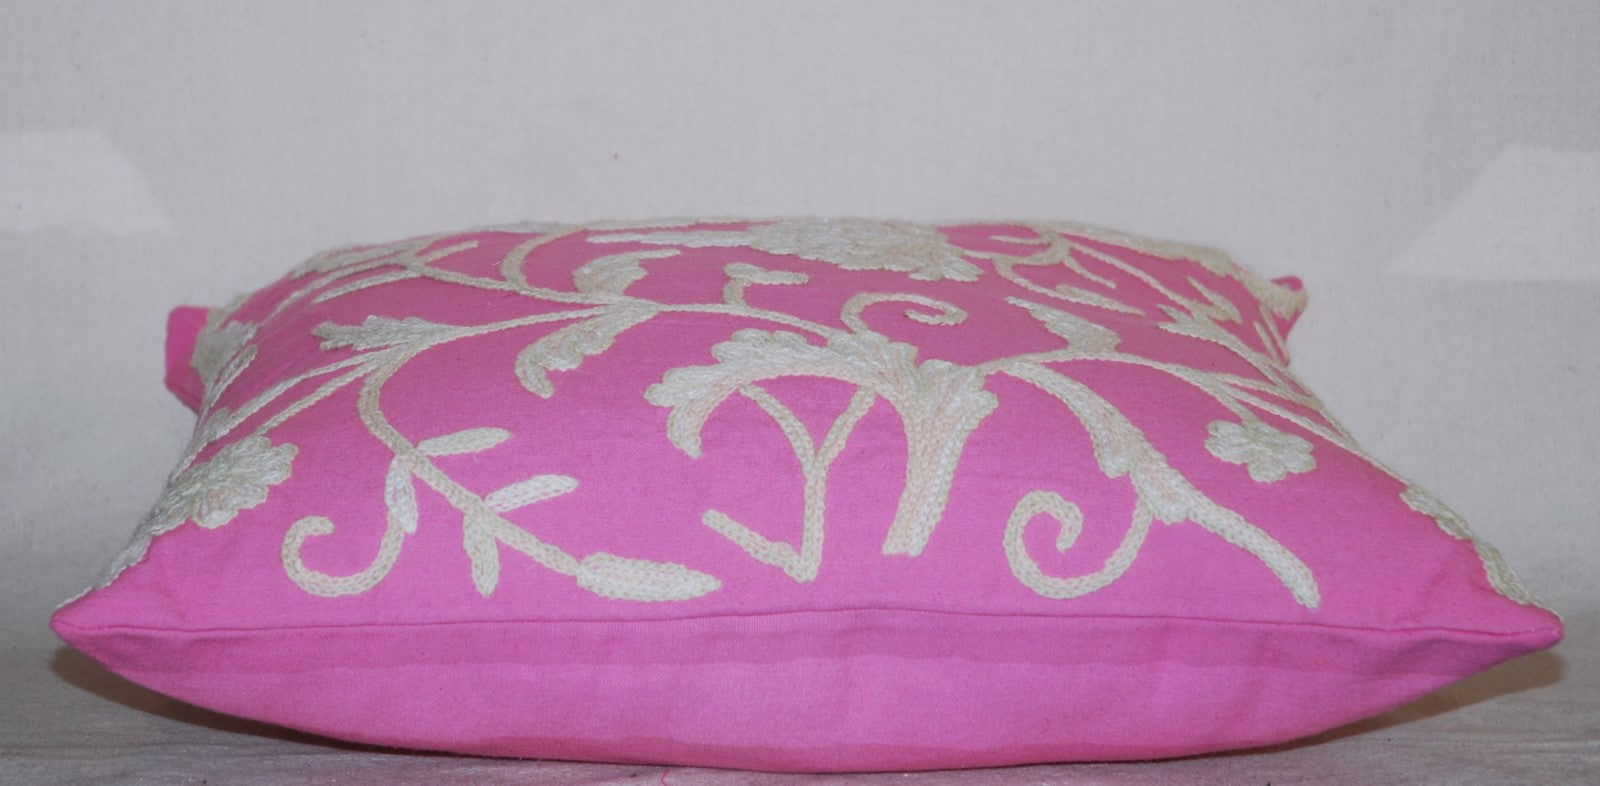 Crewel Wool on Cotton Throw Pillow Cushion Cover Pink, Multicolor Pastels Embroidery #CW310